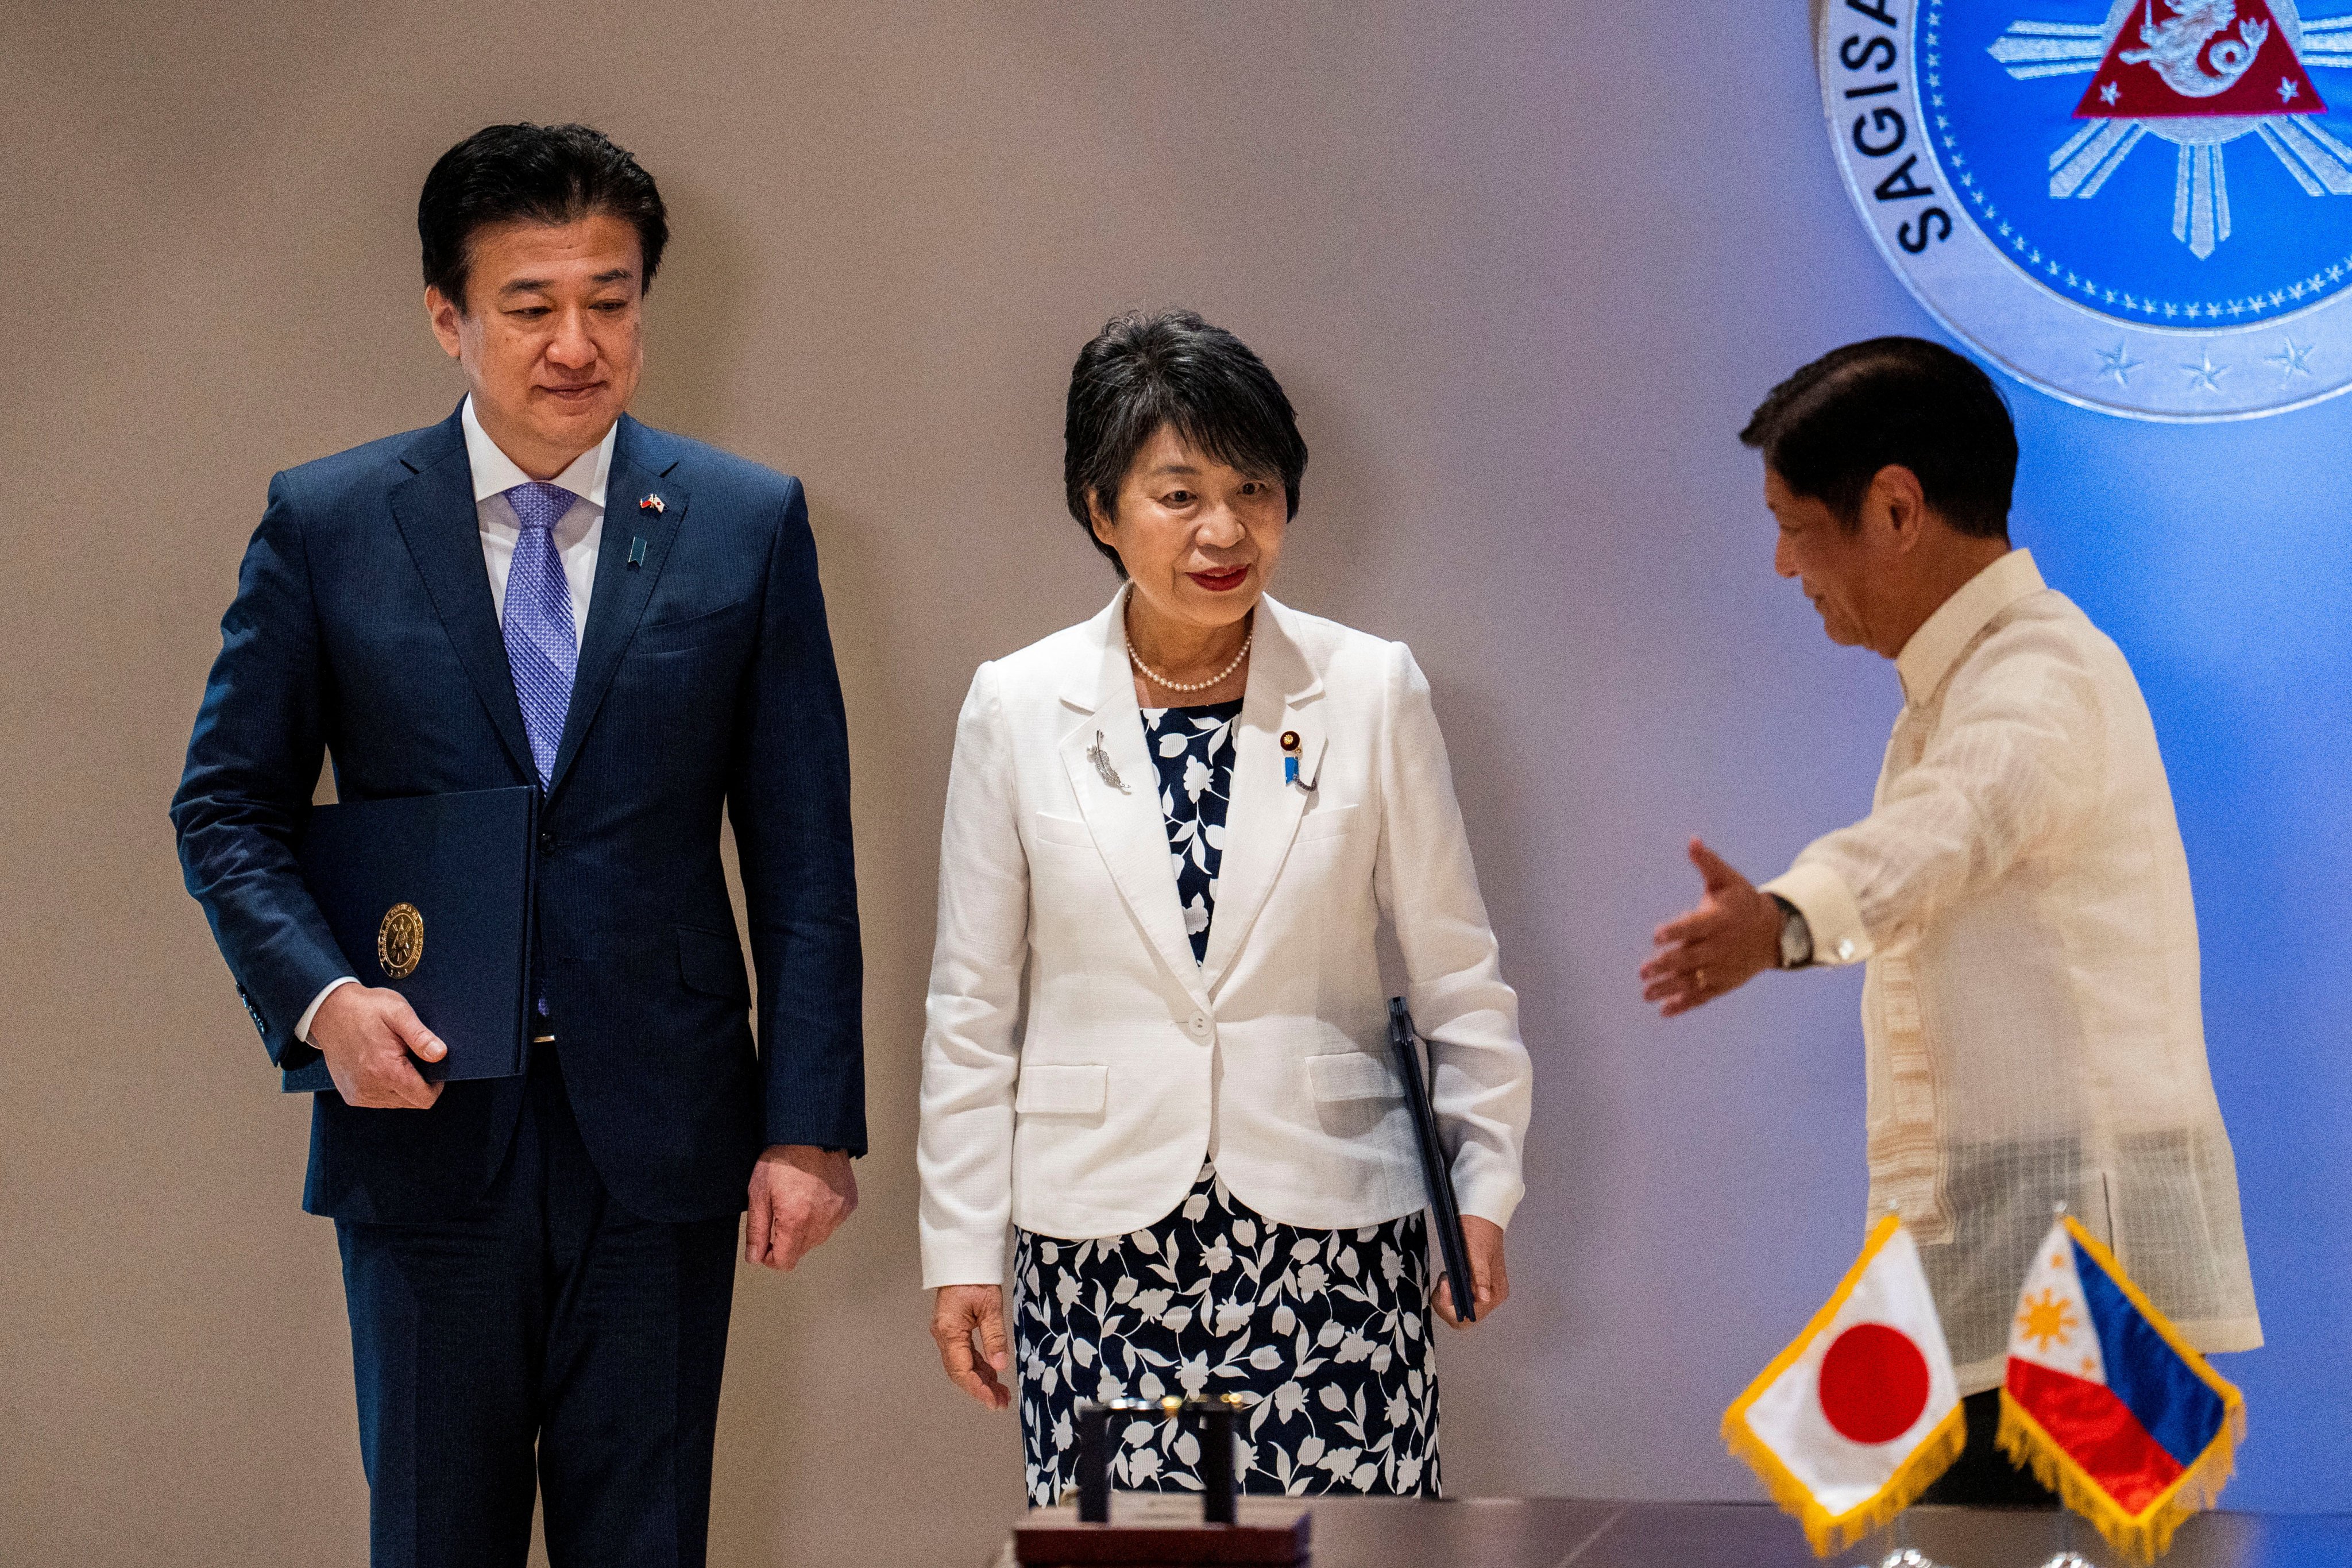 Philippine President Ferdinand Marcos Jnr (right) gestures as he speaks to Japanese Defence Minister Minoru Kihara (left) and Japanese Foreign Minister Yoko Kamikawa following signing of a reciprocal access agreement between the countries, in Manila on Monday. Photo: Reuters